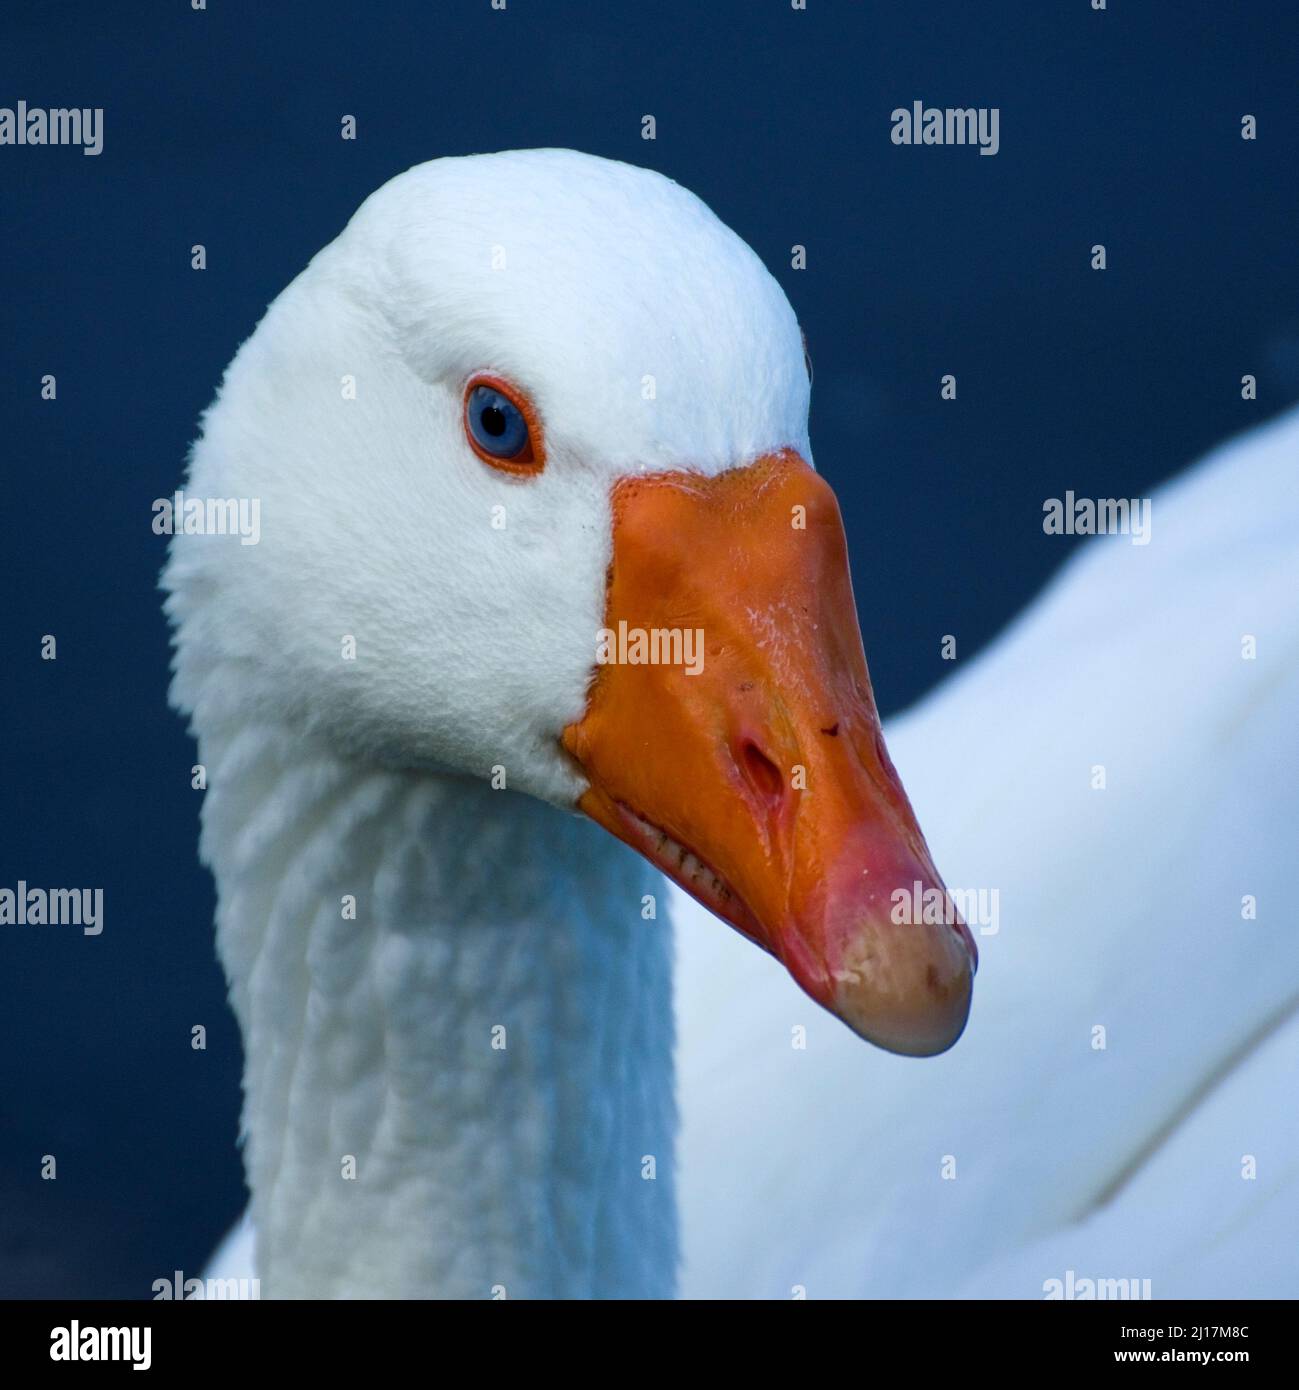 Colour photograph of Emsen Goose with blue eyes white orange beak and legs seen on British waterways, showing grace and elegance calmy traveling the B Stock Photo